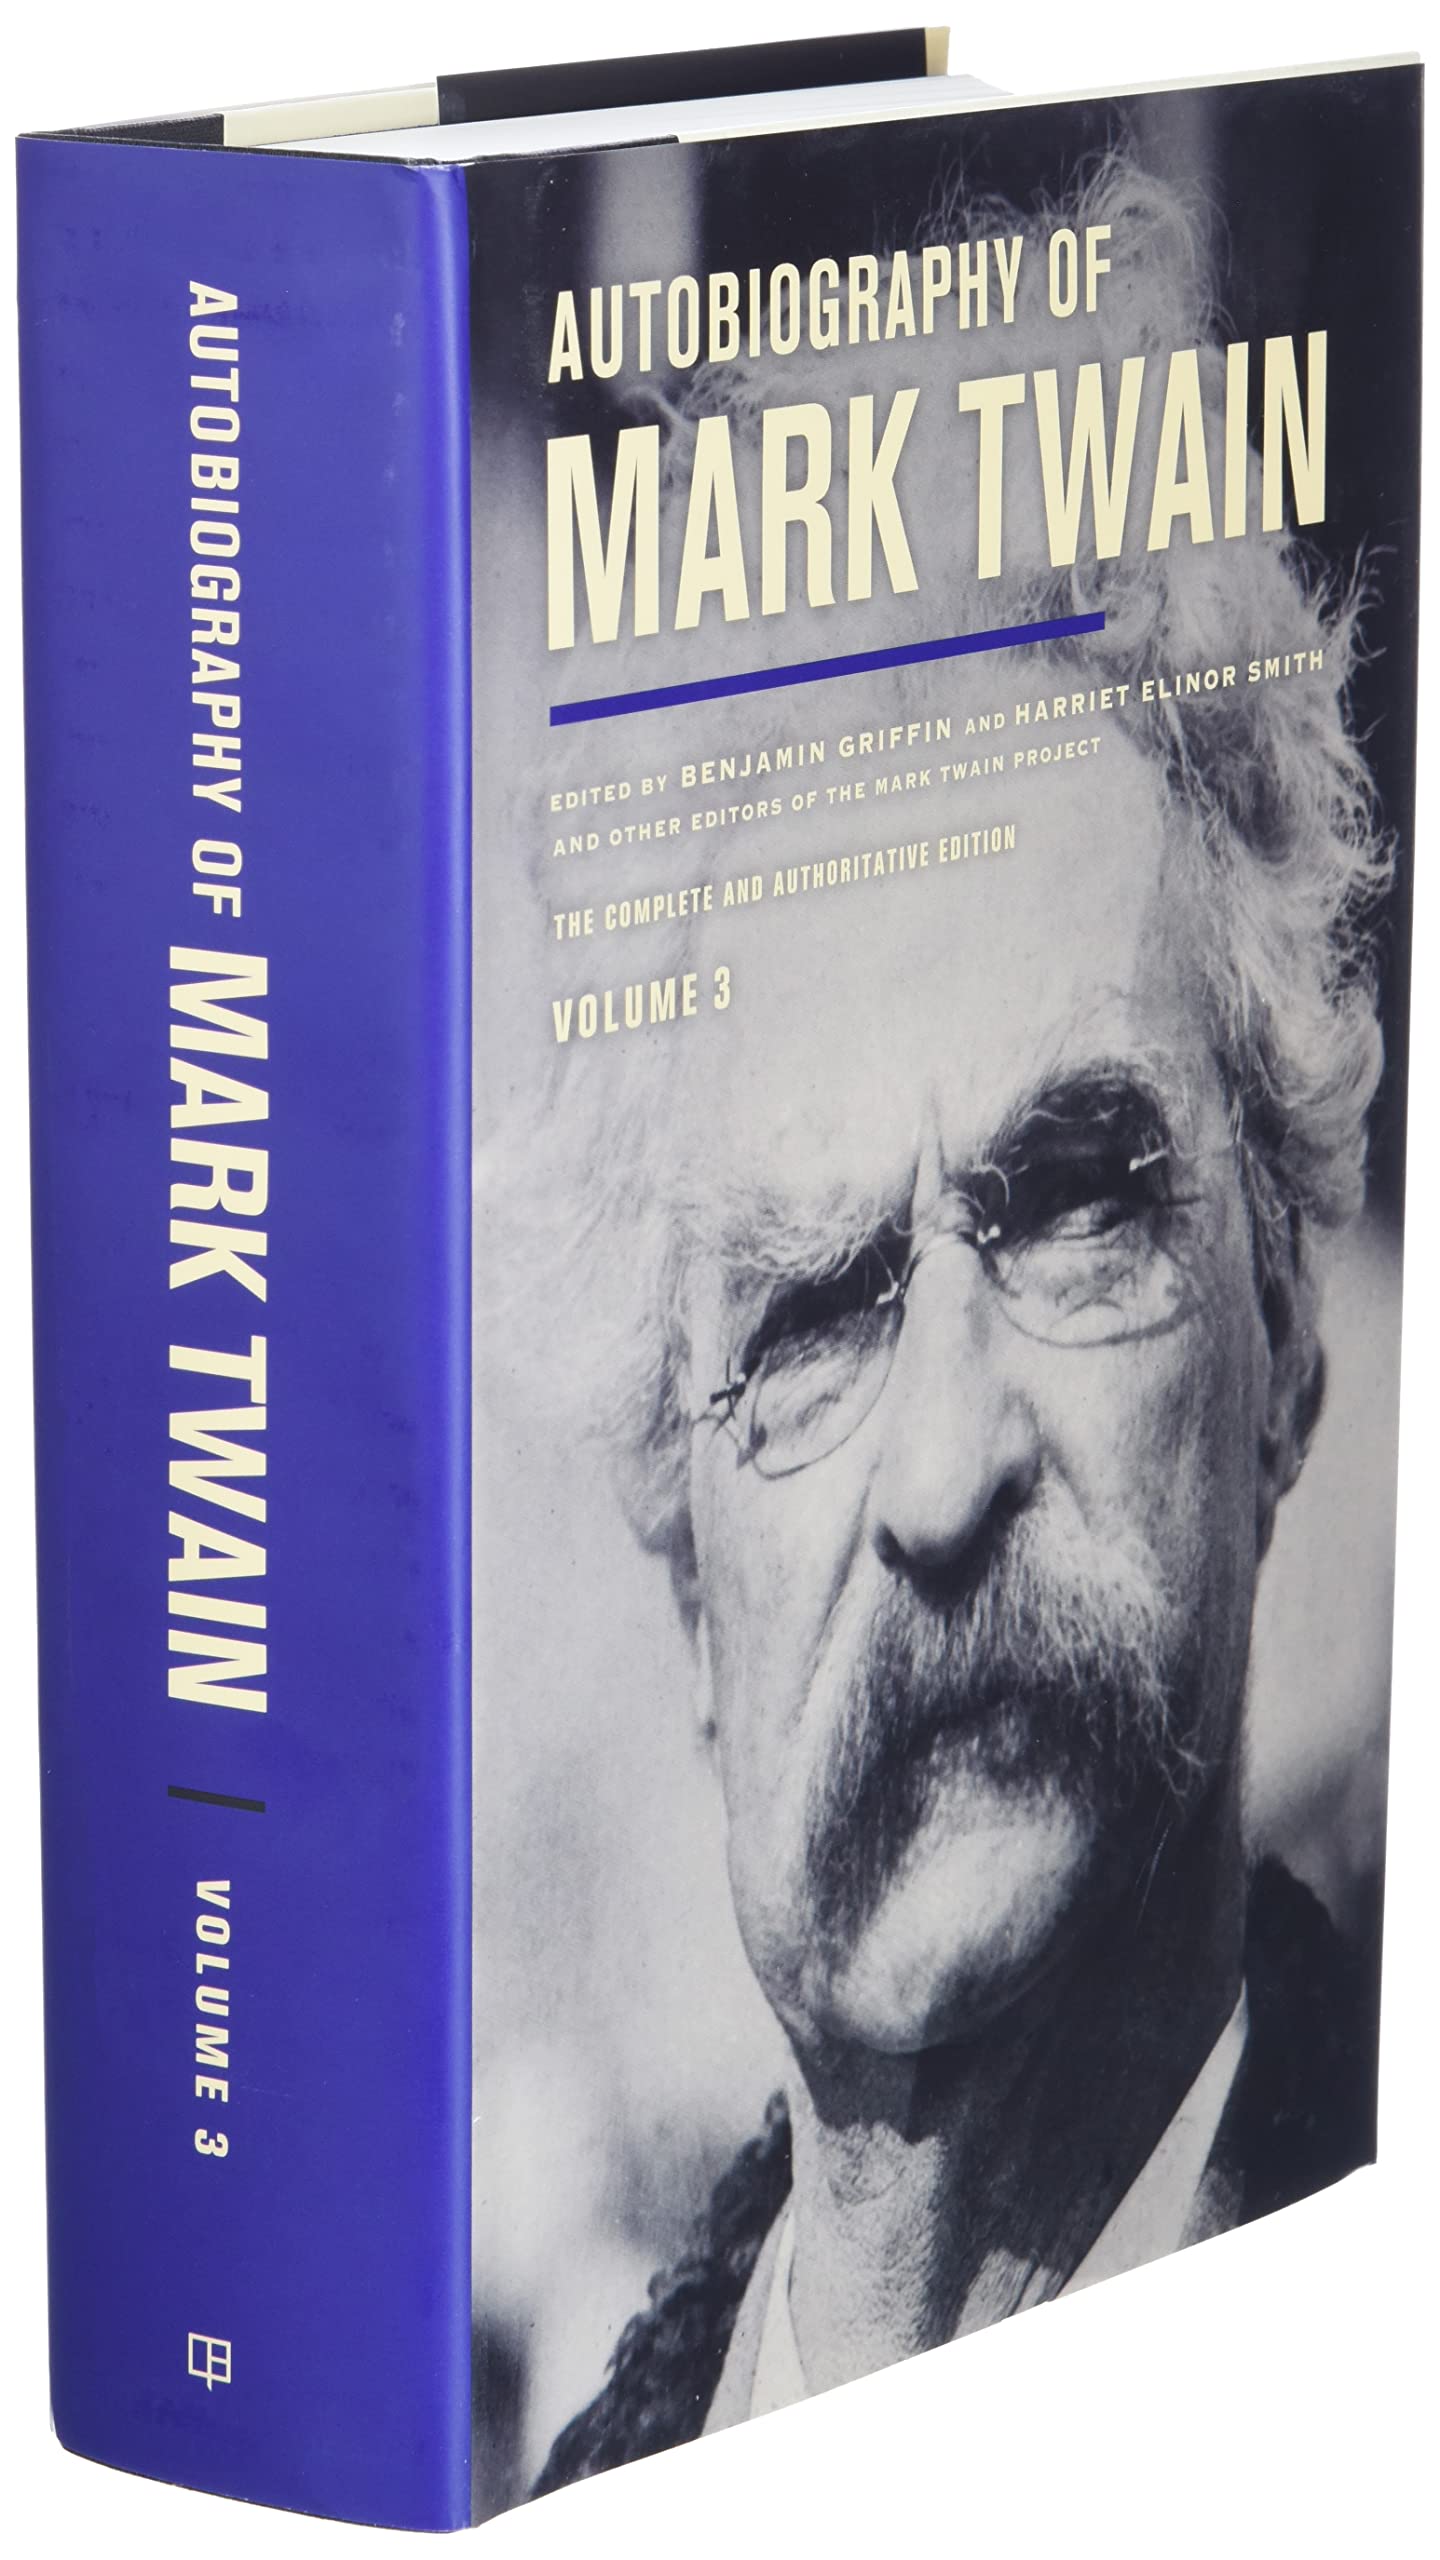 Autobiography of Mark Twain, Volume 3: The Complete and Authoritative Edition (Volume 12) (Mark Twain Papers)